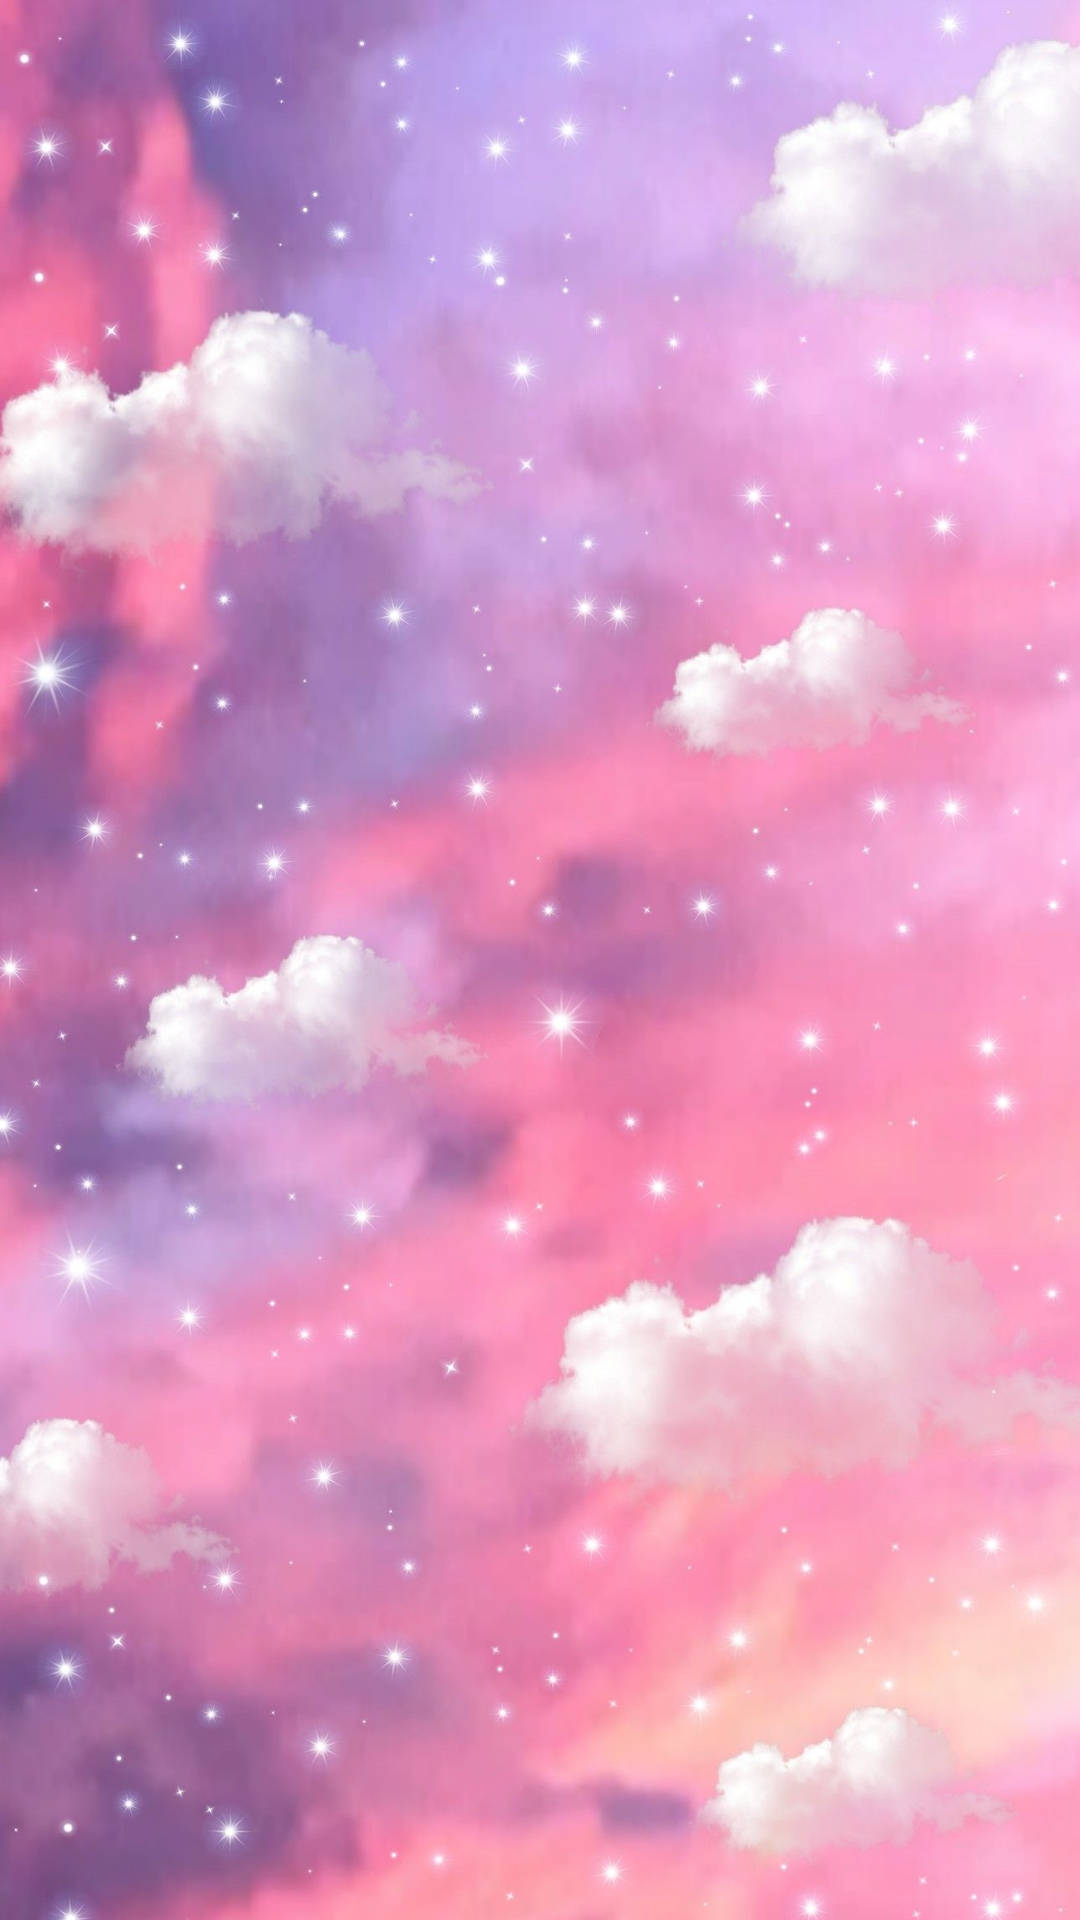 Download Girly Galaxy Pink Sky Wallpaper | Wallpapers.com